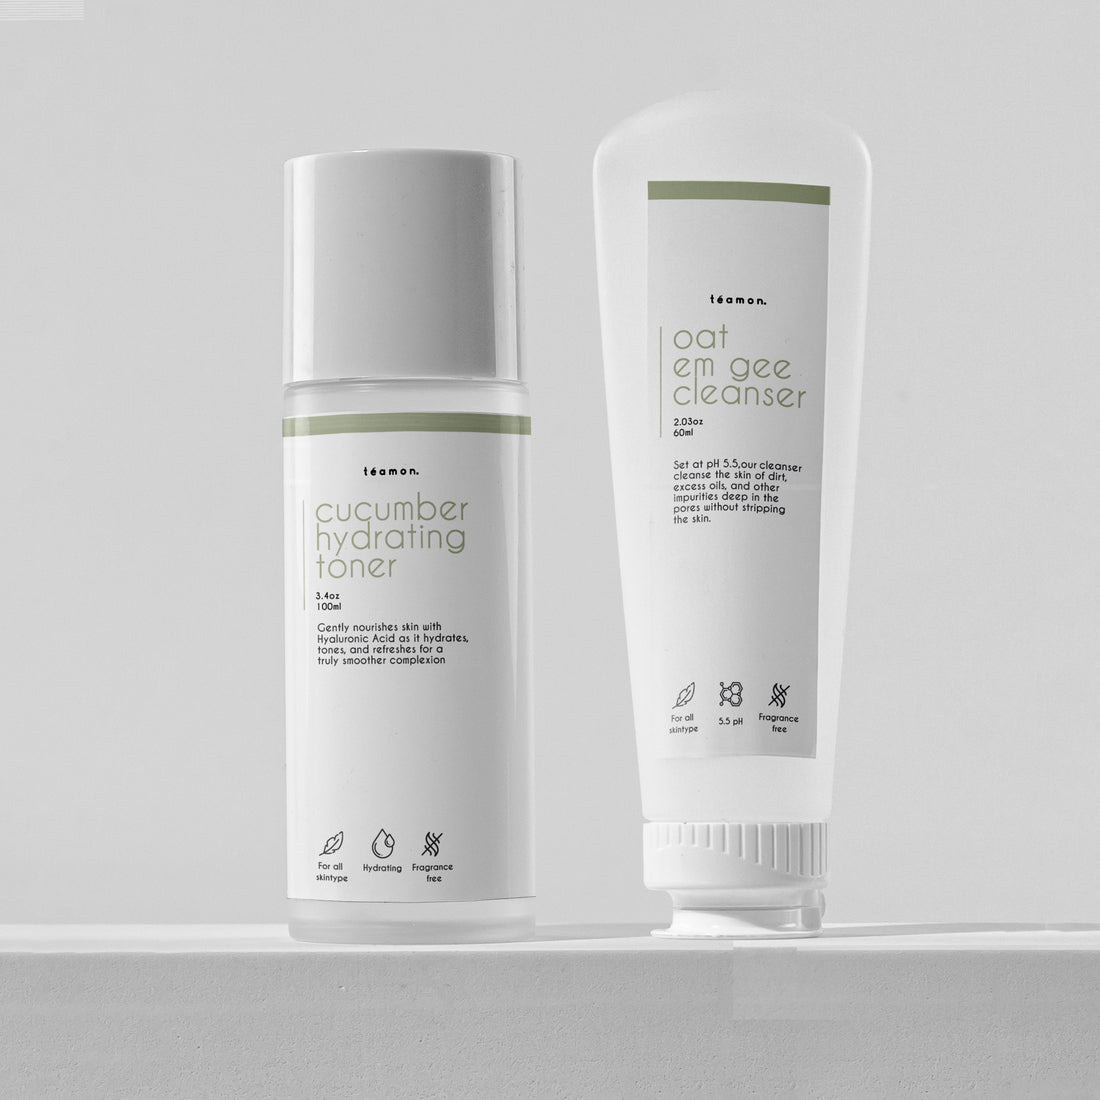 Combo 2in1 Hydrating Set